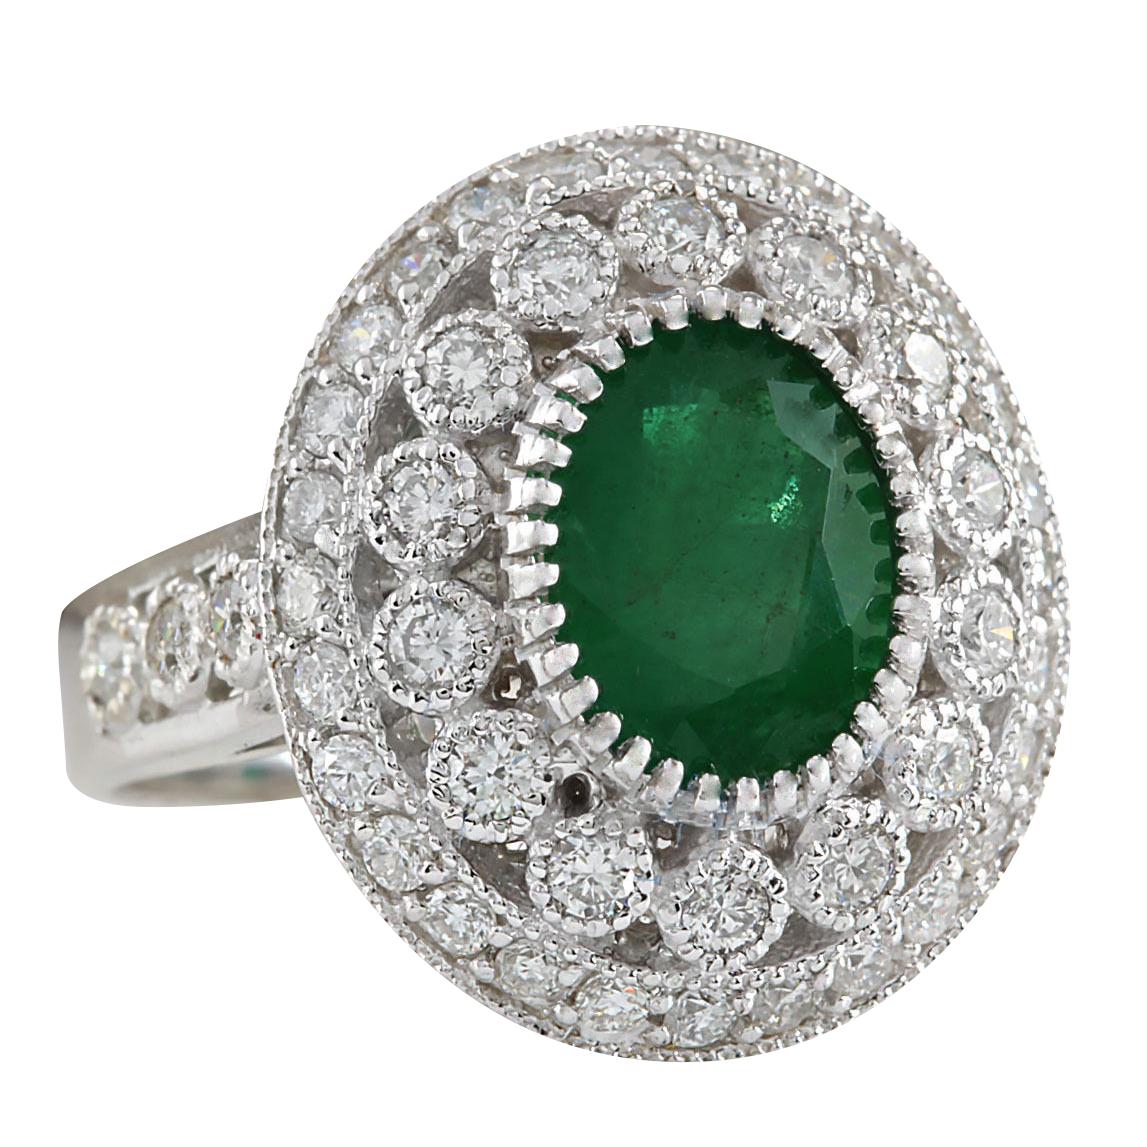 3.09 Carat Natural Emerald 14 Karat White Gold Diamond Ring
Stamped: 14K White Gold
Total Ring Weight: 8.0 Grams
Emerald Weight is 2.04 Carat (Measures: 11.00x9.00 mm)
Diamond Weight is 1.05 Carat
Color: F-G, Clarity: VS2-SI1
Face Measures: